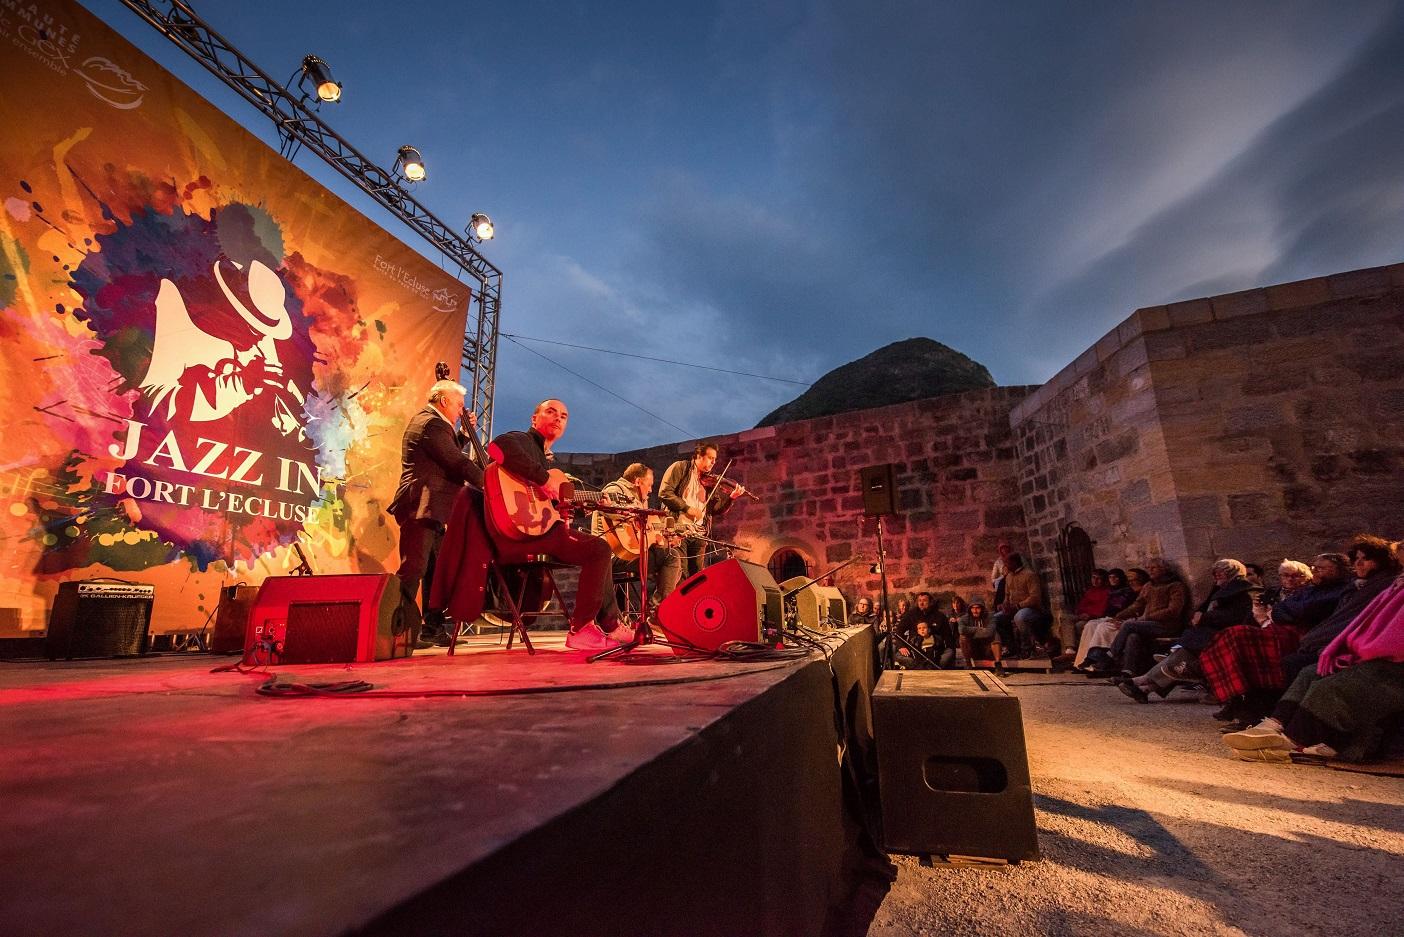 Jazz in Fort L'Ecluse